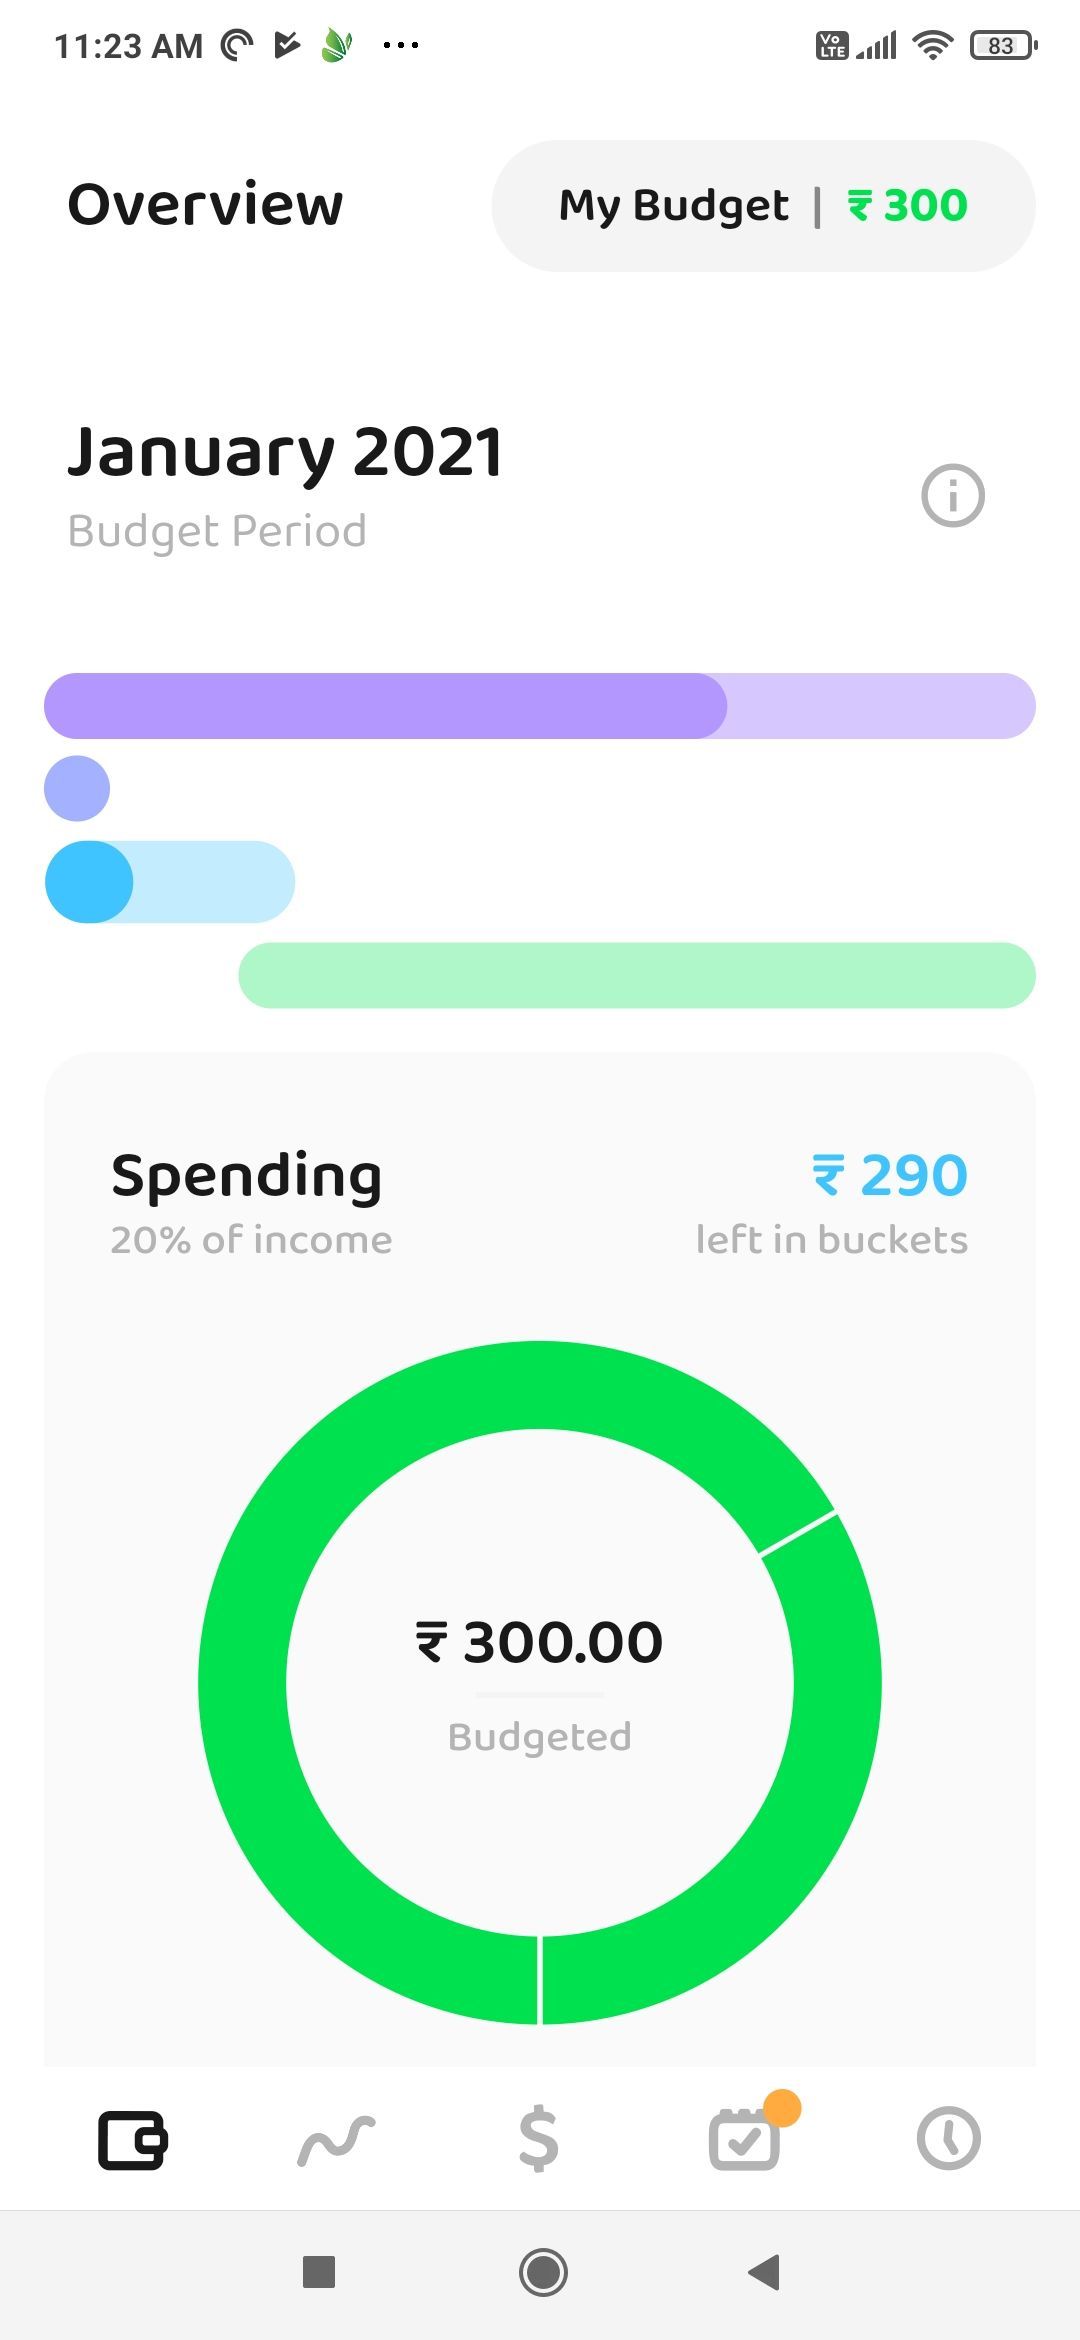 Check your budget statistics in a handy dashboard